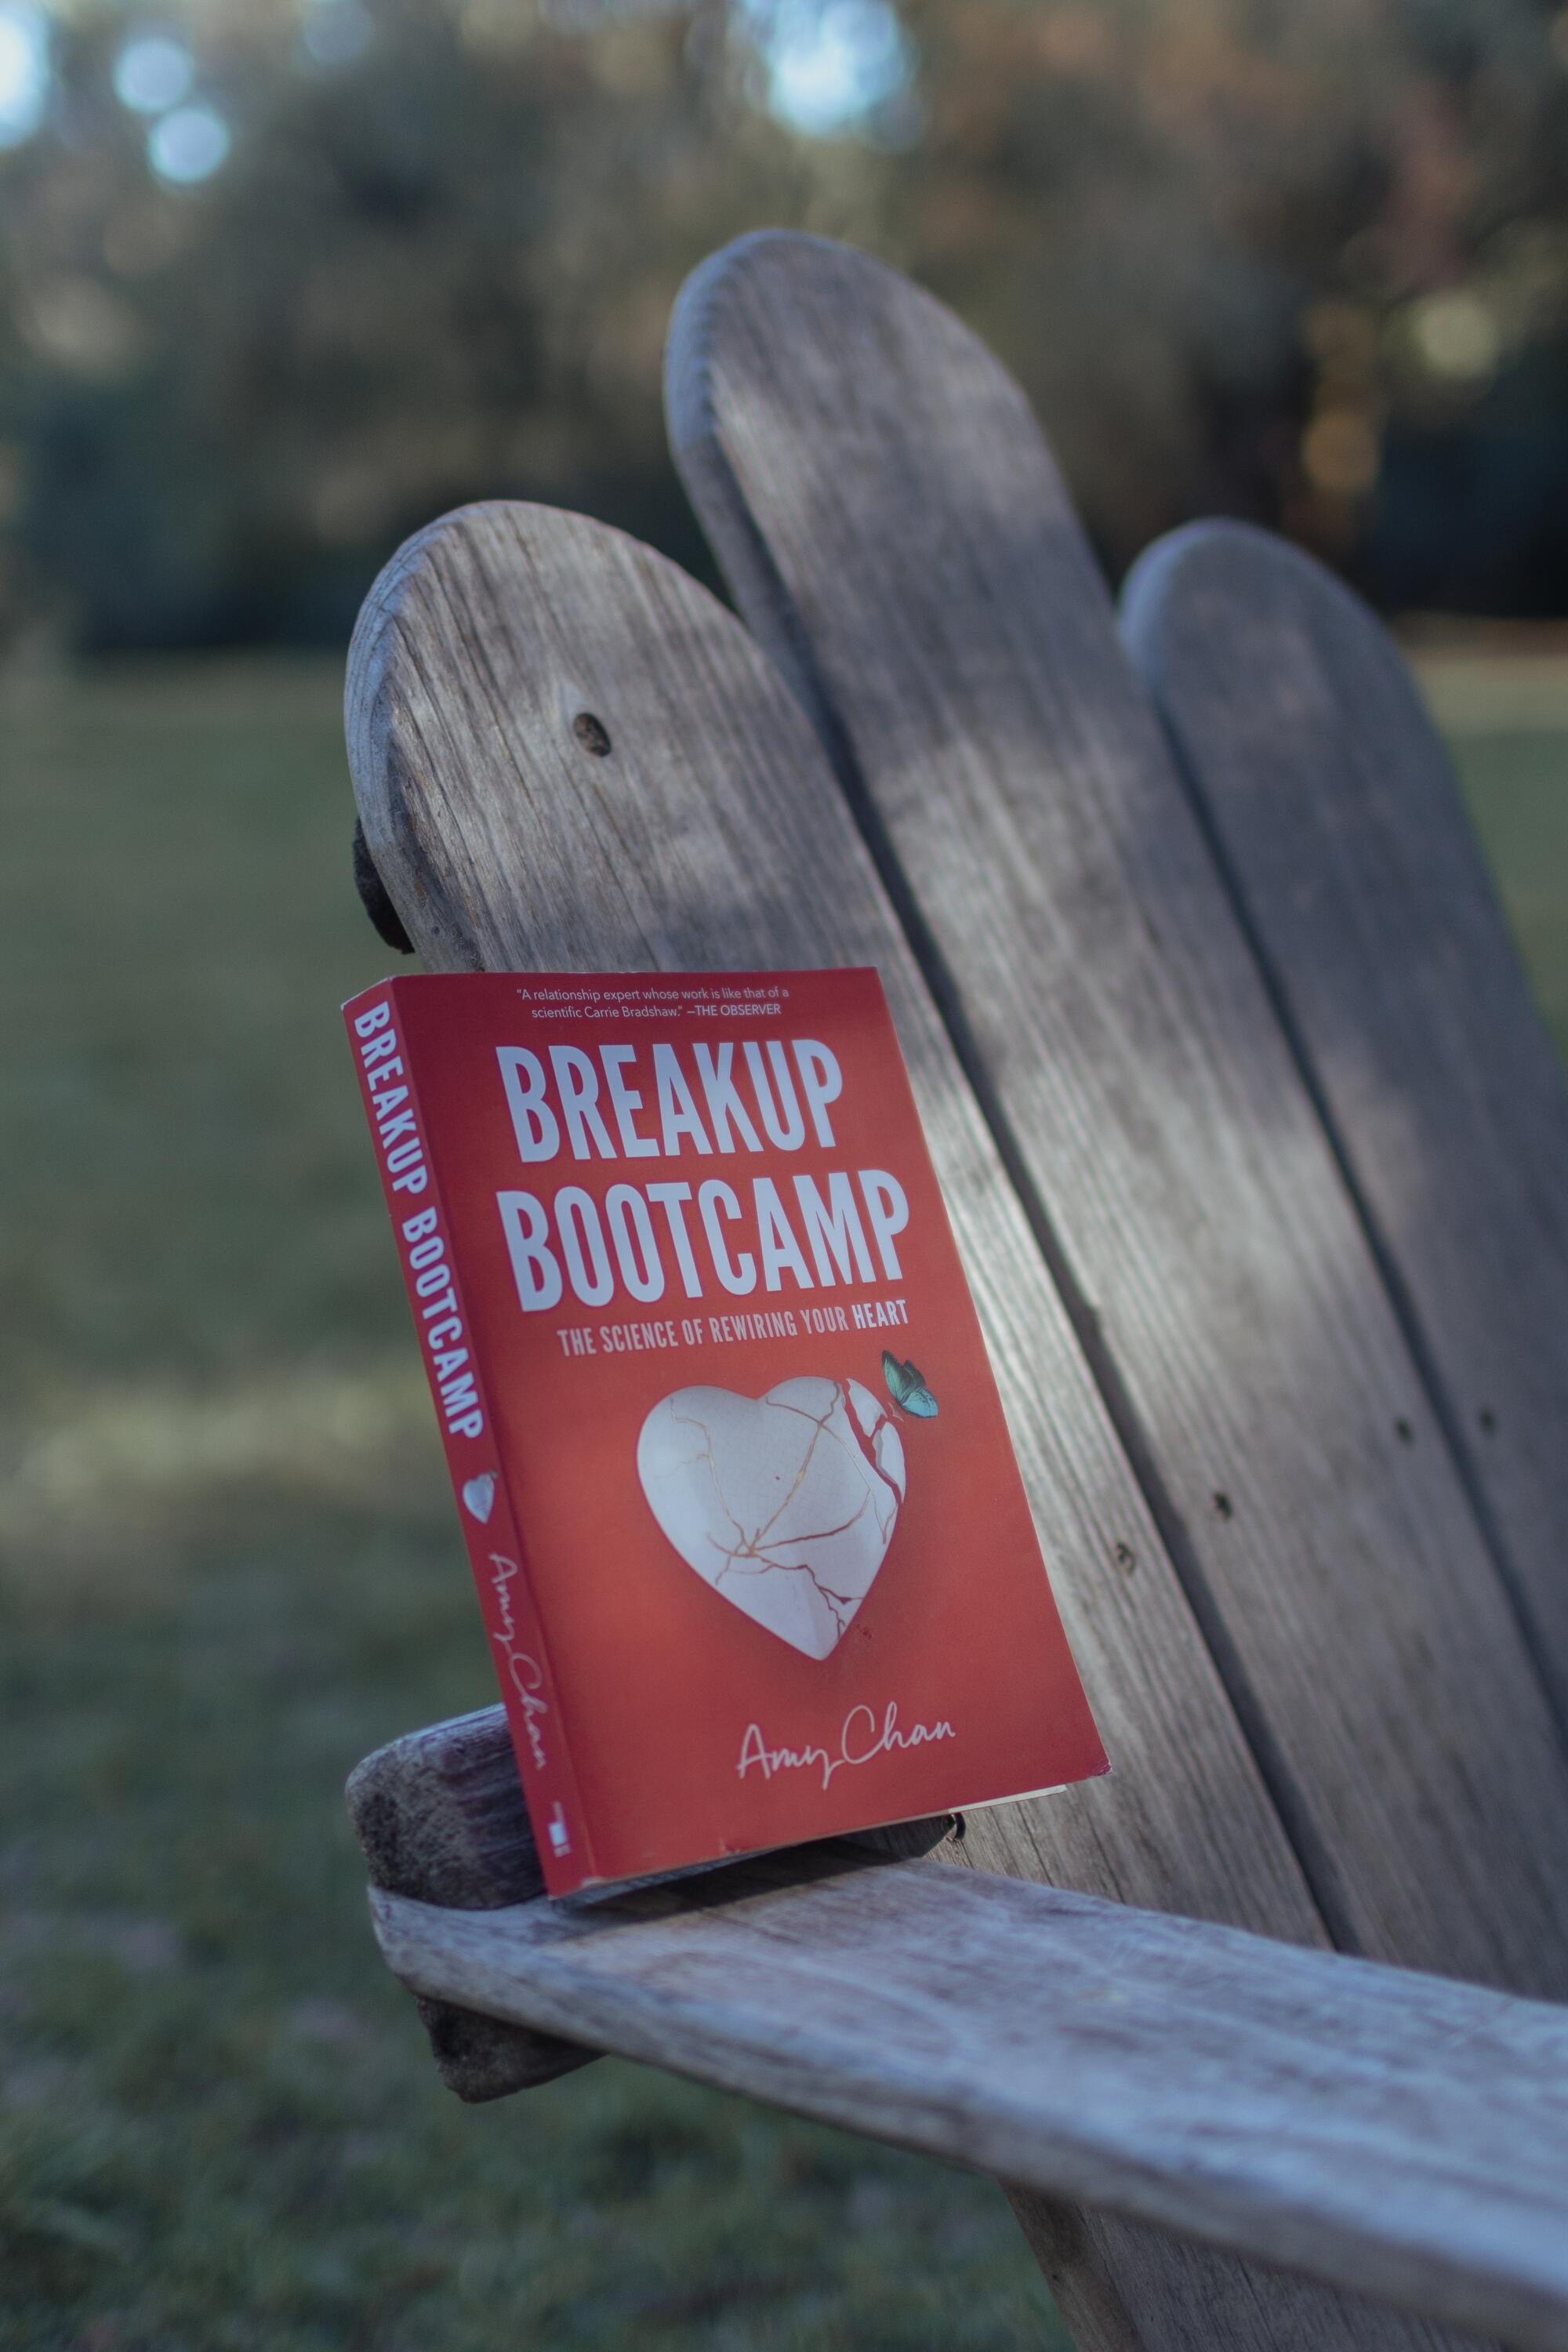 The book "Breakup Bootcamp" on an Adirondack chair.